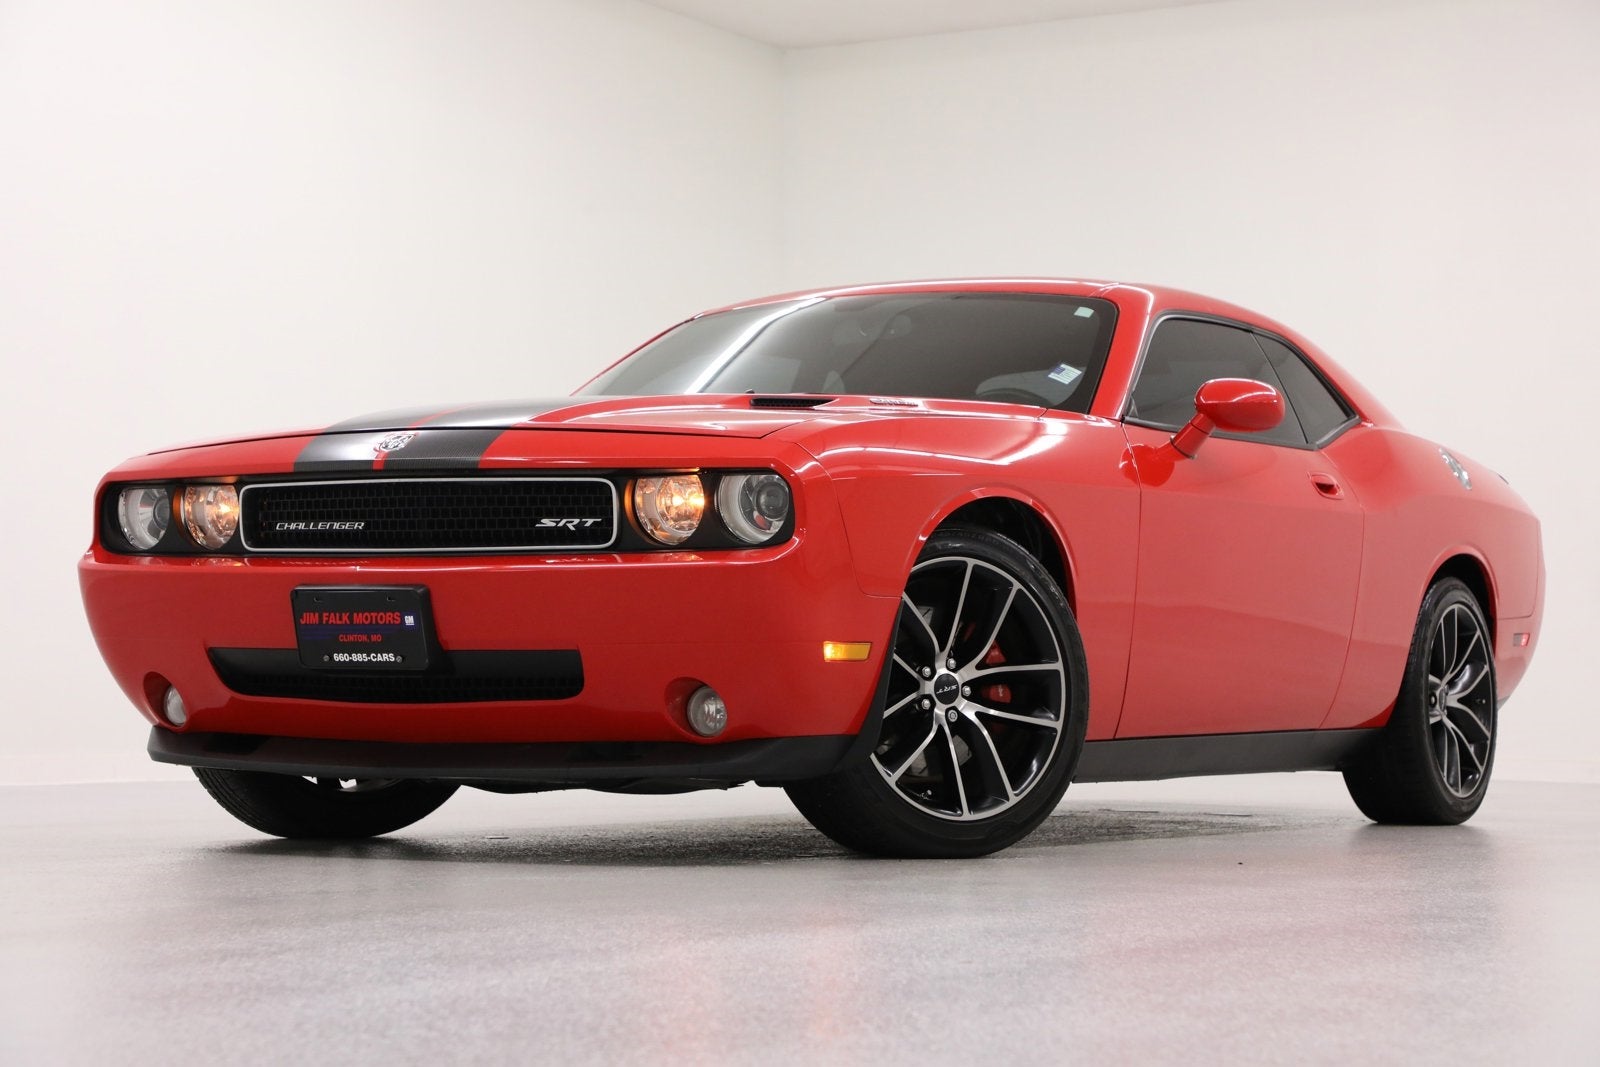 2010 Dodge Challenger SRT8 Power Sunroof 6.1L V8 Dual Exhaust Heated Black Leather Seats Kicker Audio Remote Start Cruise